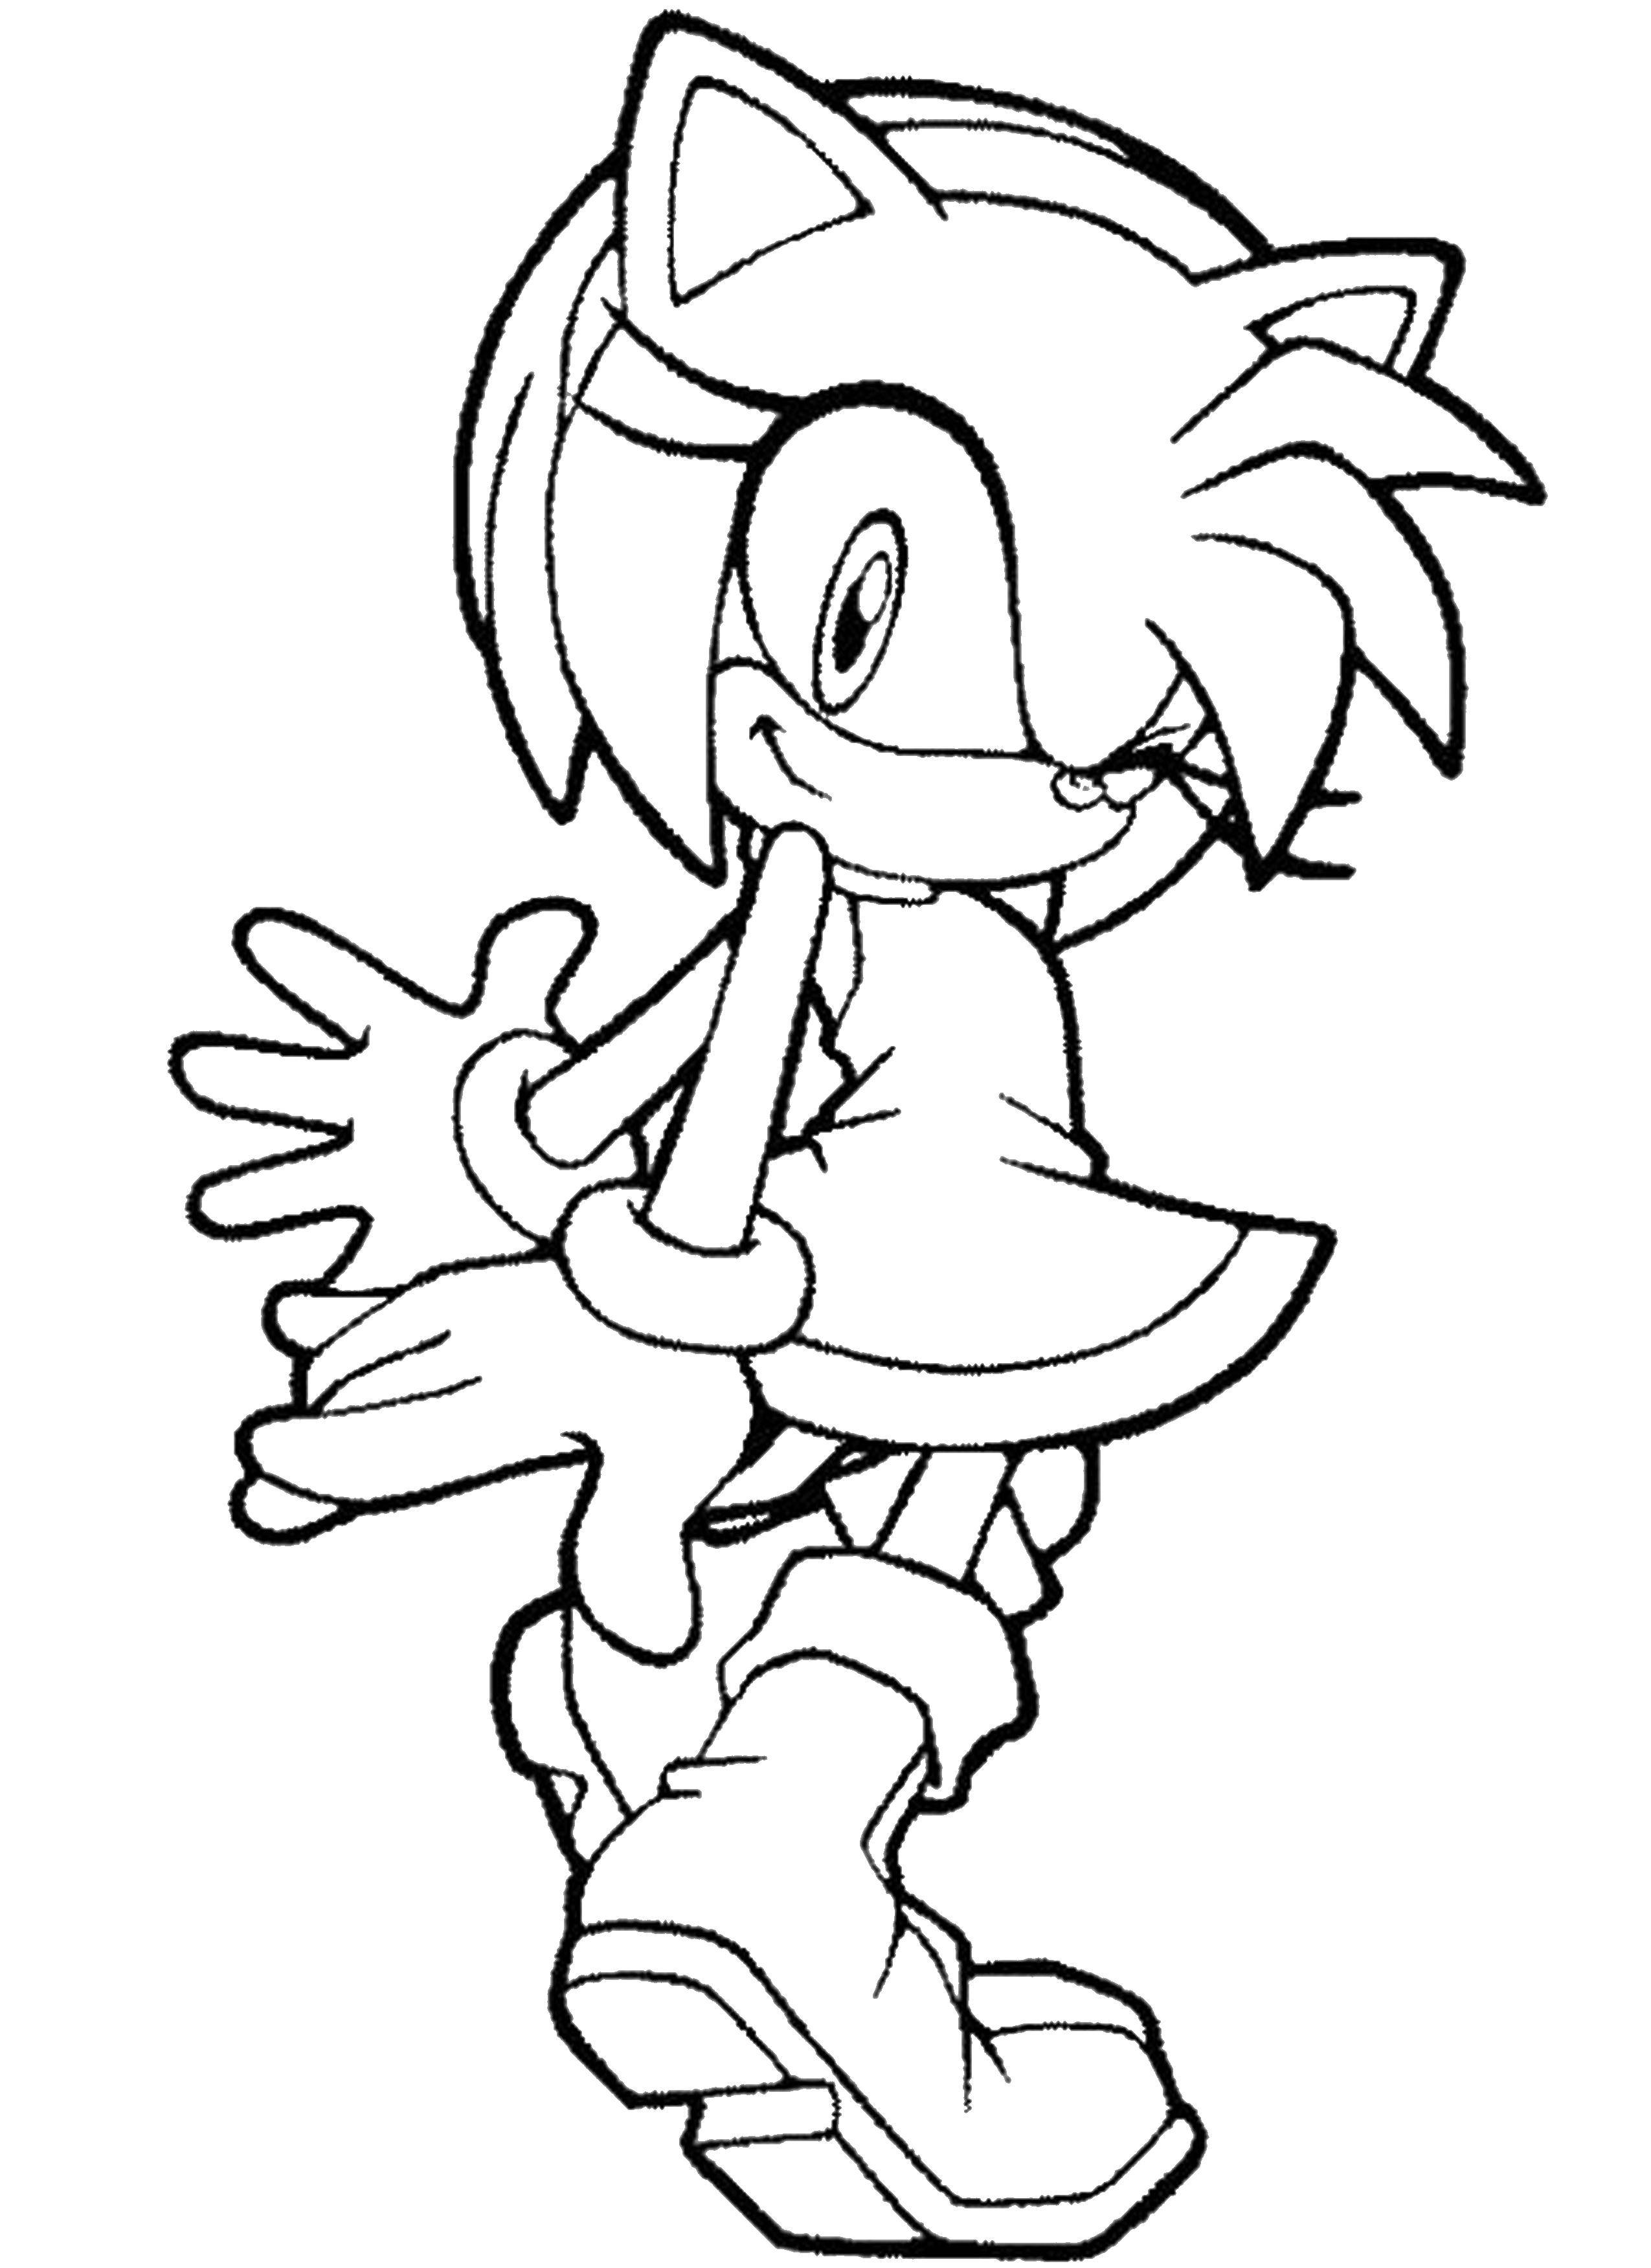 Online coloring pages amy coloring friend of sonic amy cartoons